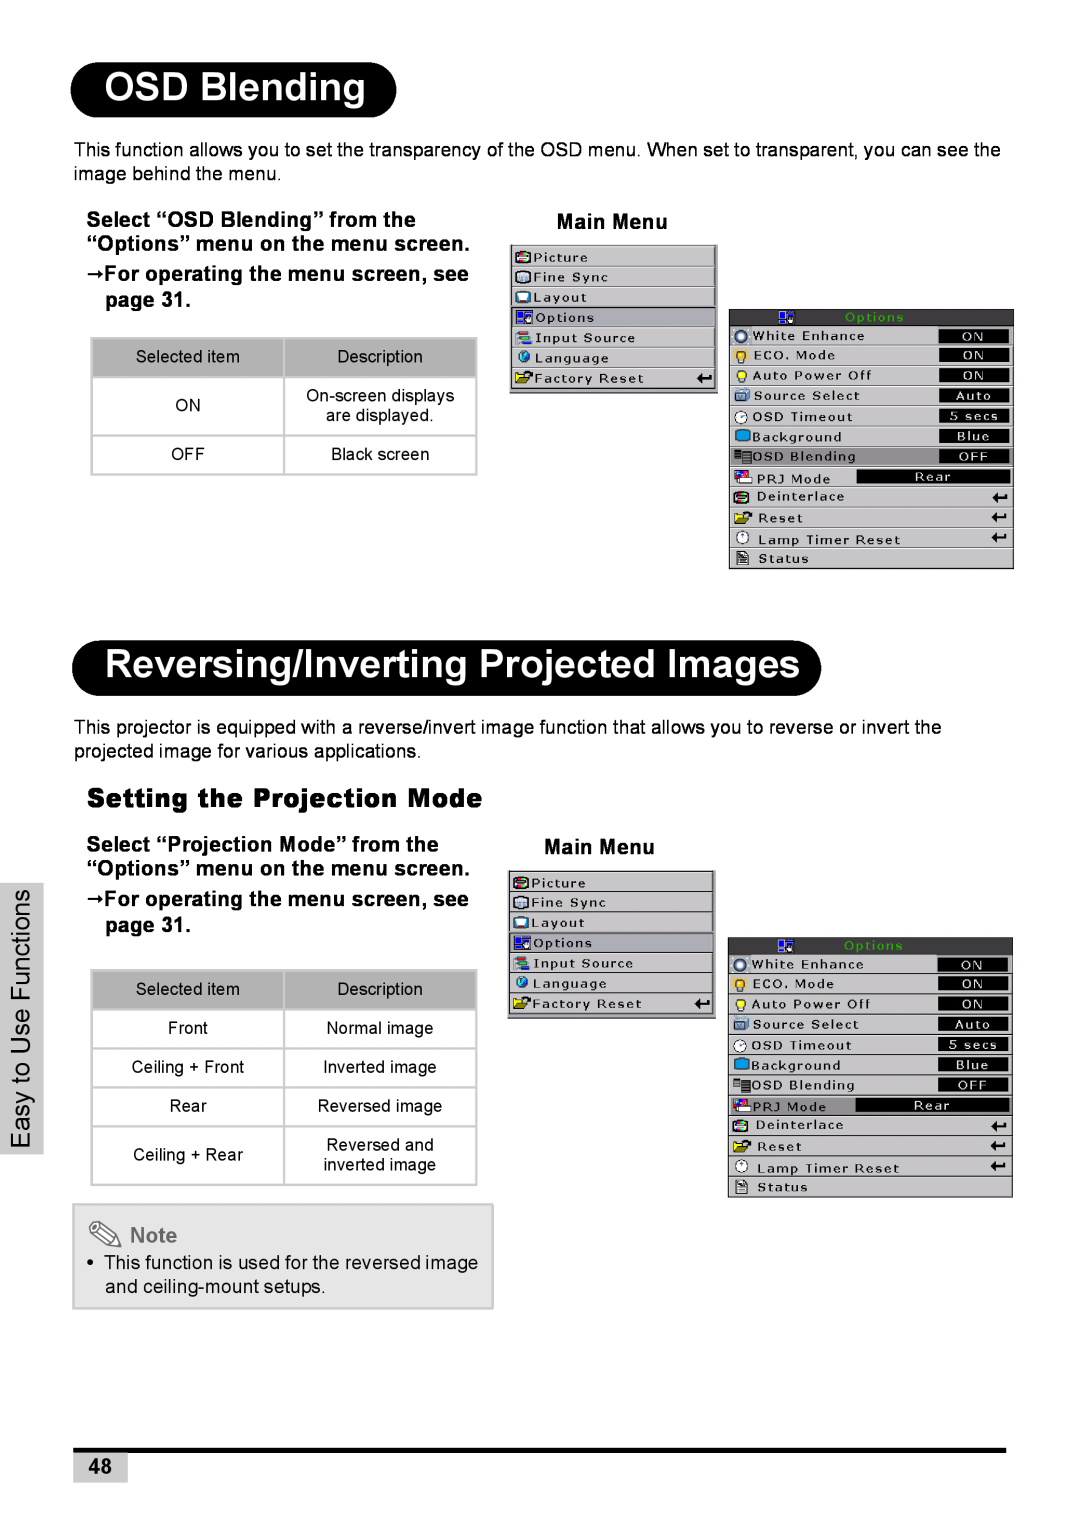 BOXLIGHT PREMIERE 30HD manual OSD Blending, Reversing/Inverting Projected Images, Setting the Projection Mode, page 